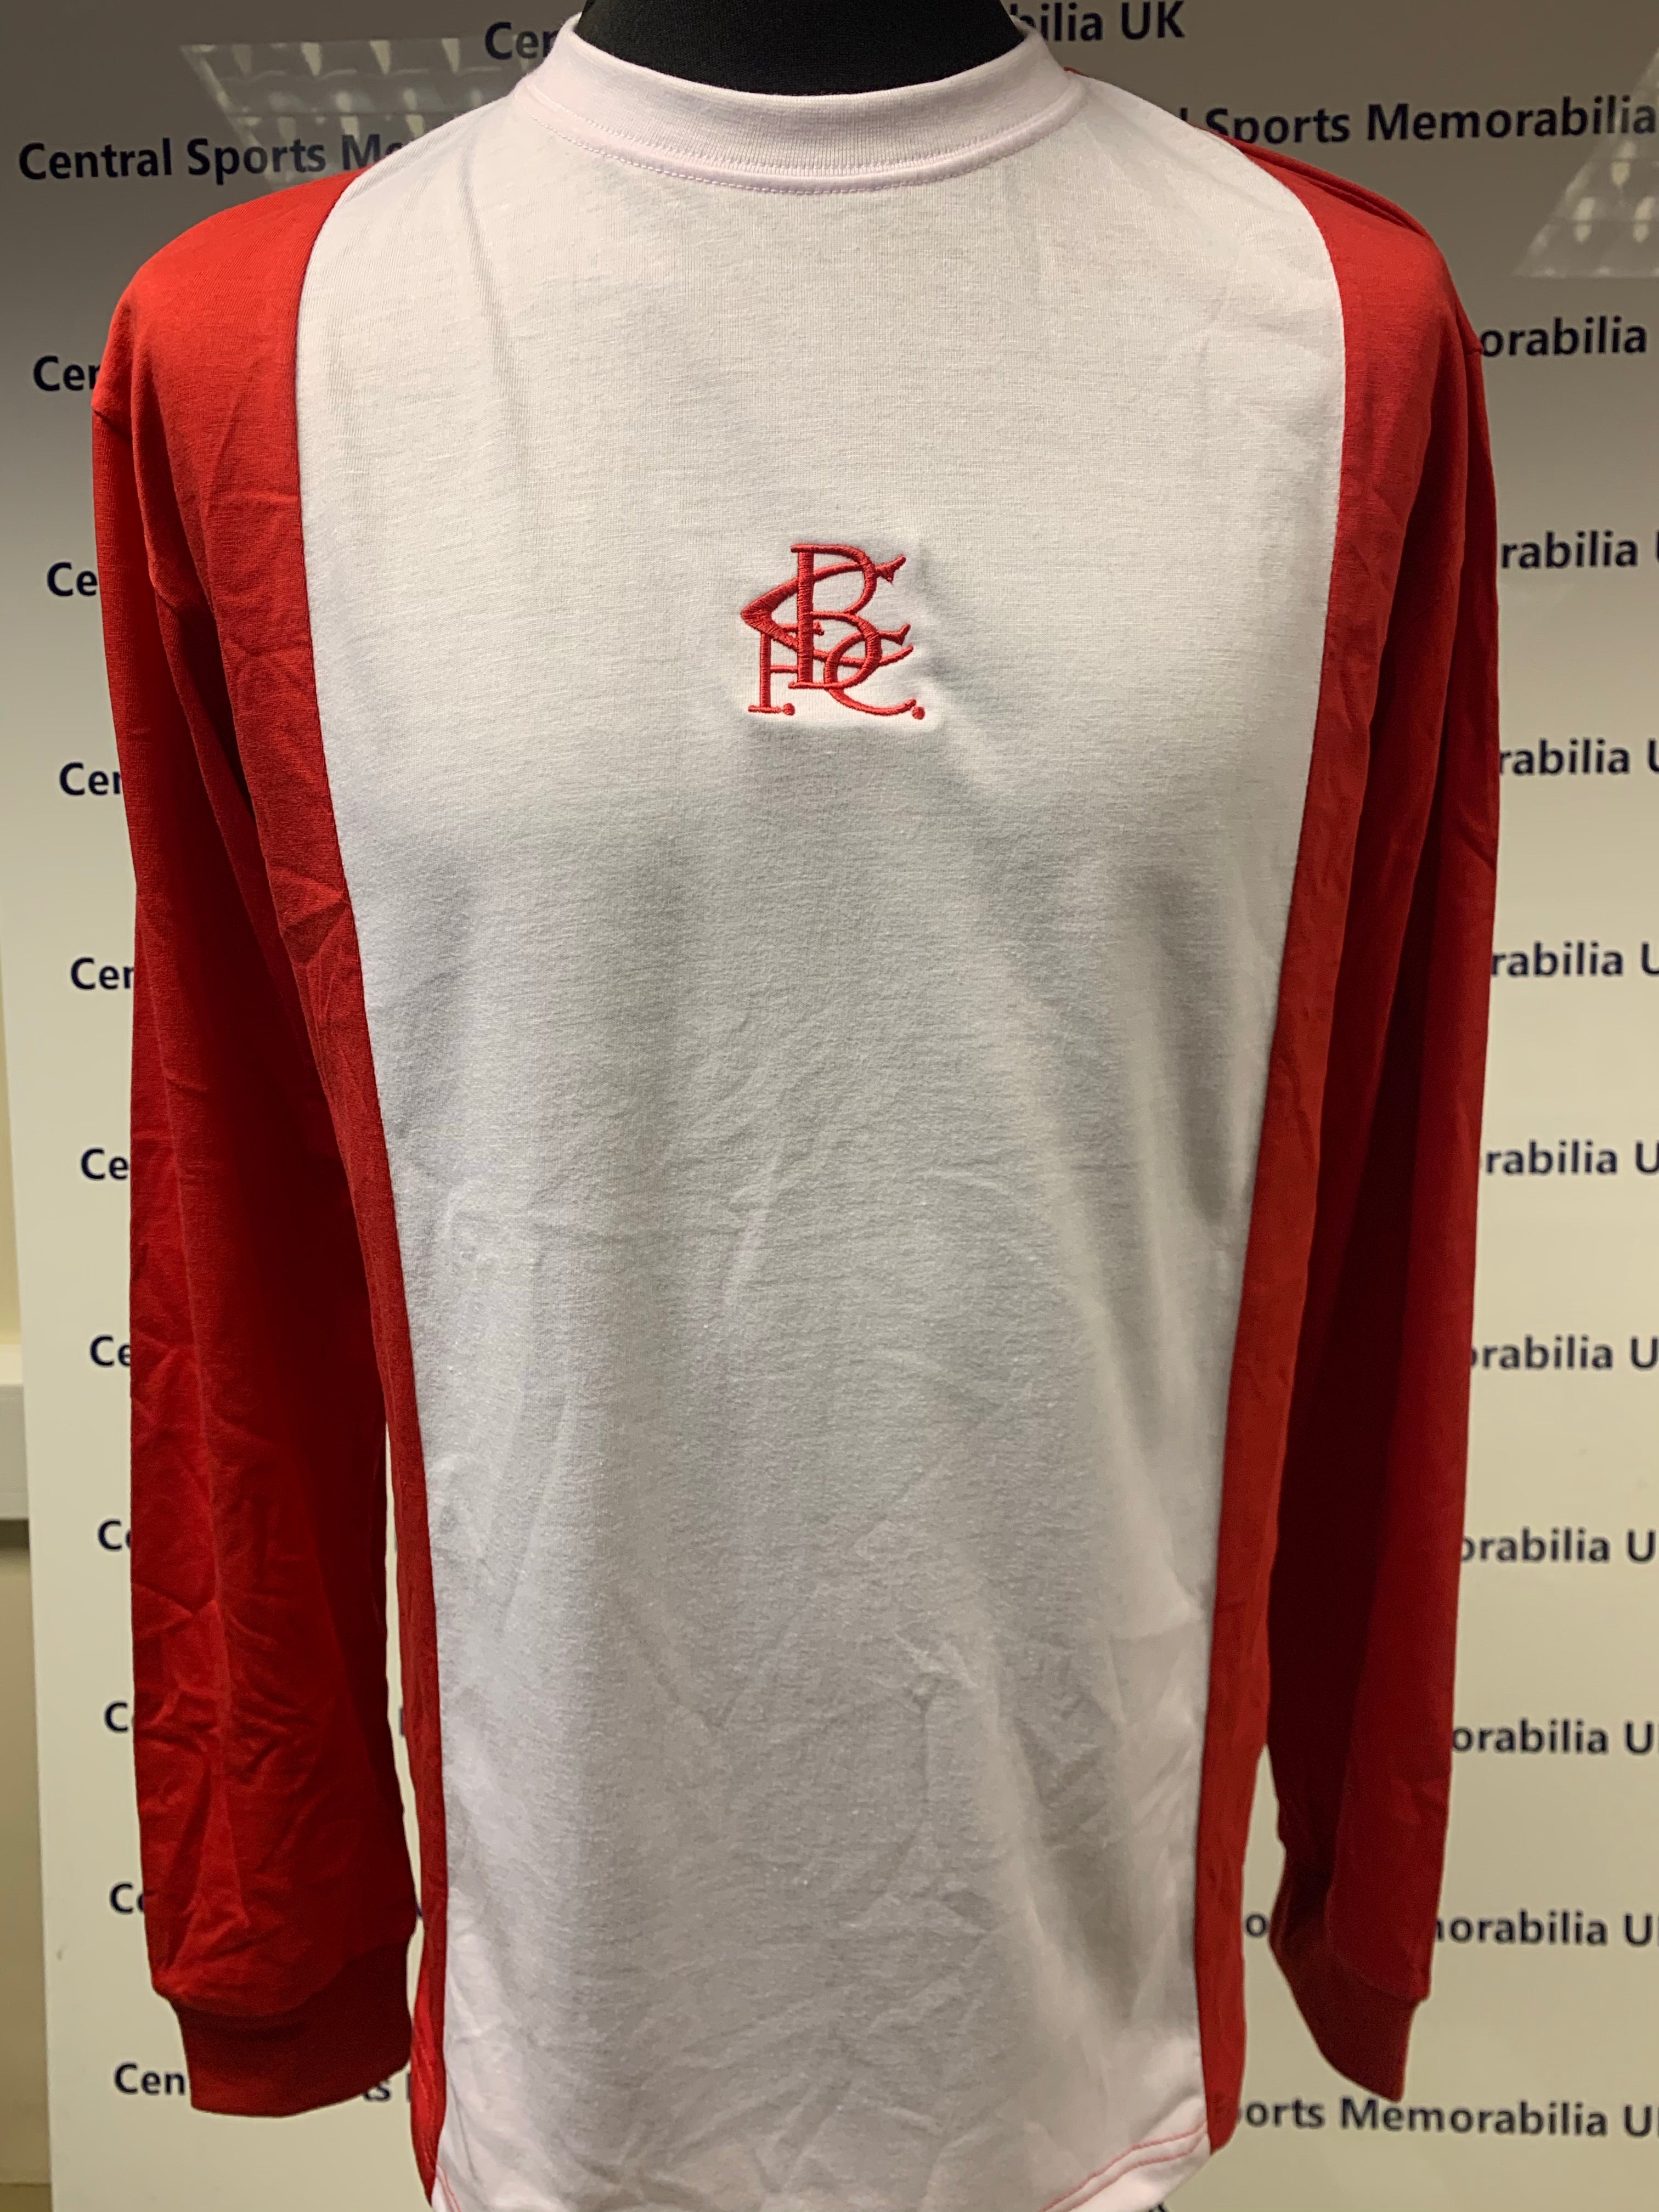 Birmingham City Retro Replica 70's Penguin Long Sleeve Shirt in Red.  All sizes available.